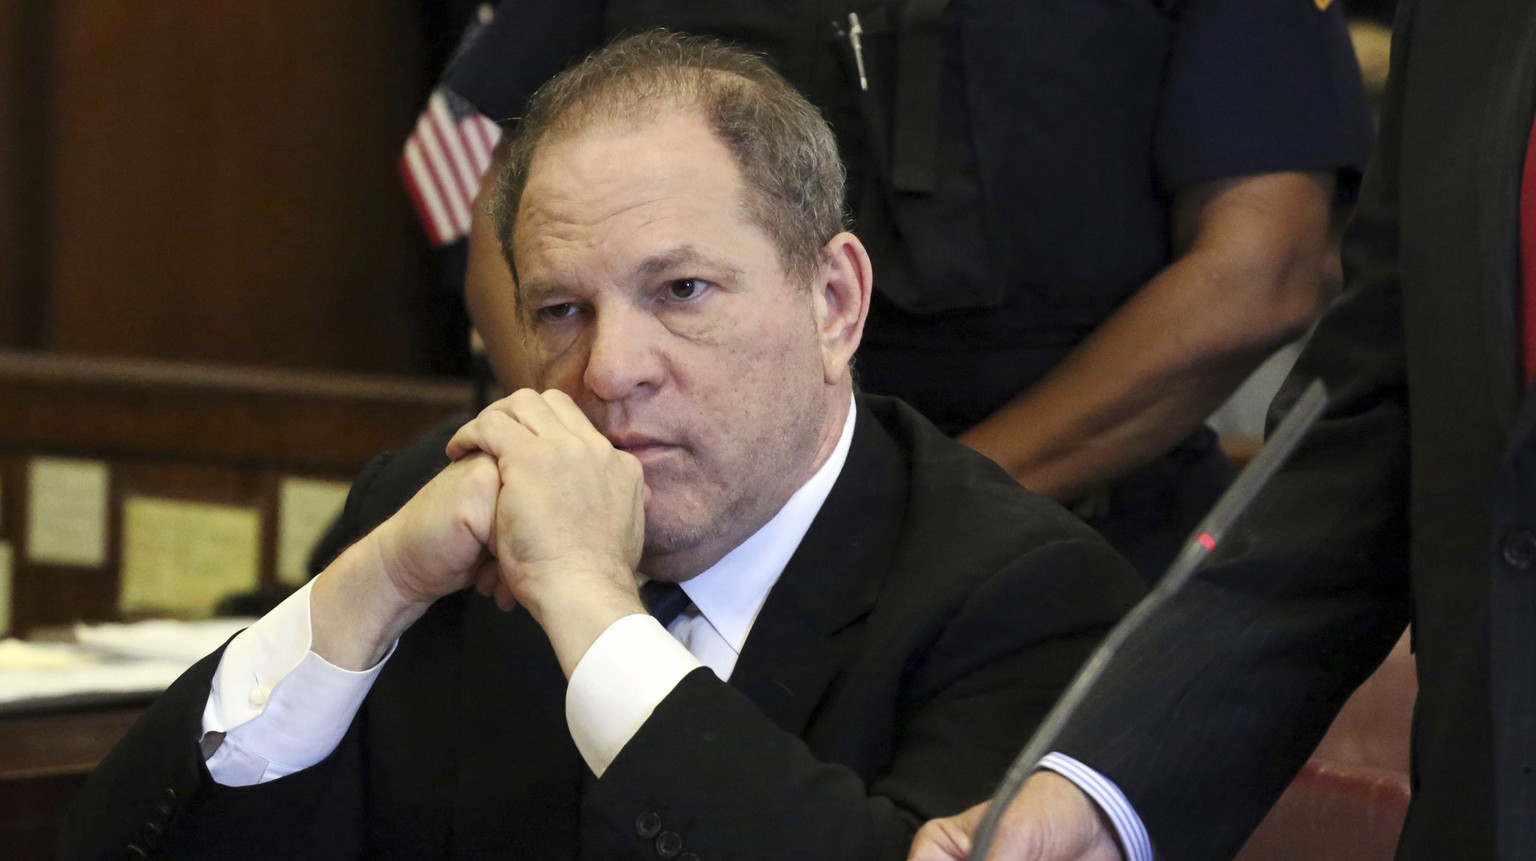 FILE - In this July 9, 2018 file photo, Harvey Weinstein attends his arraignment in court, in New York. Weinstein&#039;s lawyers want a New York court to throw out sexual assault charges against him.  ...